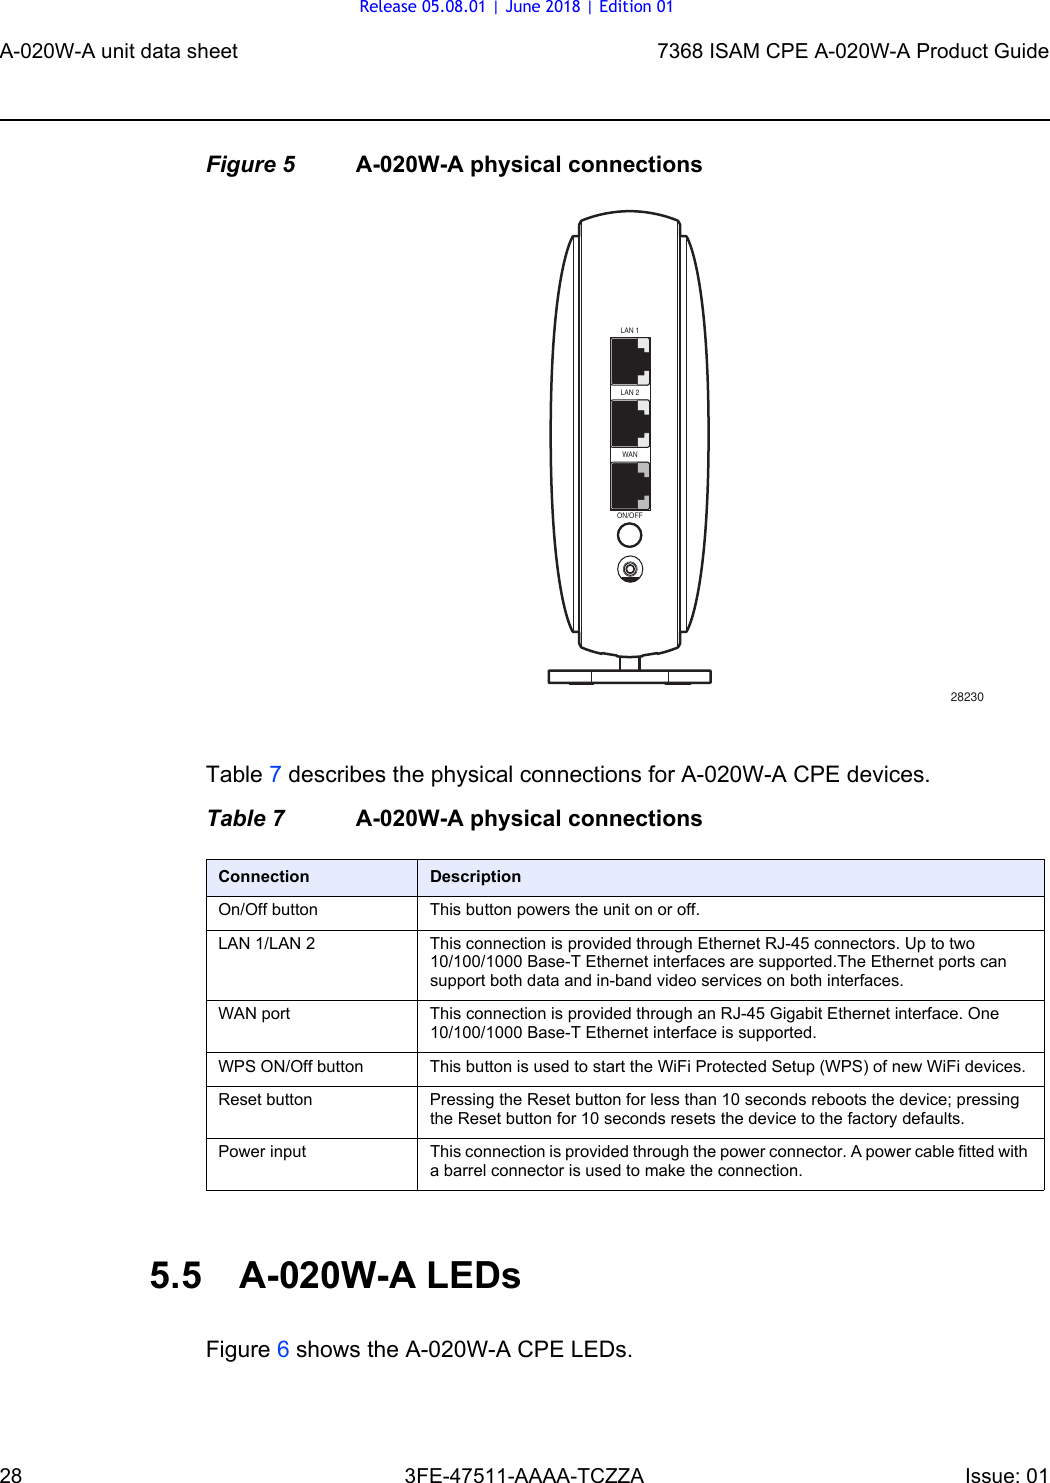 A-020W-A unit data sheet287368 ISAM CPE A-020W-A Product Guide3FE-47511-AAAA-TCZZA Issue: 01 Figure 5 A-020W-A physical connectionsTable 7 describes the physical connections for A-020W-A CPE devices.Table 7 A-020W-A physical connections5.5 A-020W-A LEDsFigure 6 shows the A-020W-A CPE LEDs.Connection DescriptionOn/Off button This button powers the unit on or off.LAN 1/LAN 2 This connection is provided through Ethernet RJ-45 connectors. Up to two 10/100/1000 Base-T Ethernet interfaces are supported.The Ethernet ports can support both data and in-band video services on both interfaces.WAN port This connection is provided through an RJ-45 Gigabit Ethernet interface. One 10/100/1000 Base-T Ethernet interface is supported.WPS ON/Off button This button is used to start the WiFi Protected Setup (WPS) of new WiFi devices.Reset button Pressing the Reset button for less than 10 seconds reboots the device; pressing the Reset button for 10 seconds resets the device to the factory defaults.Power input This connection is provided through the power connector. A power cable fitted with a barrel connector is used to make the connection.ON/OFFWANLAN 2LAN 128230Release 05.08.01 | June 2018 | Edition 01